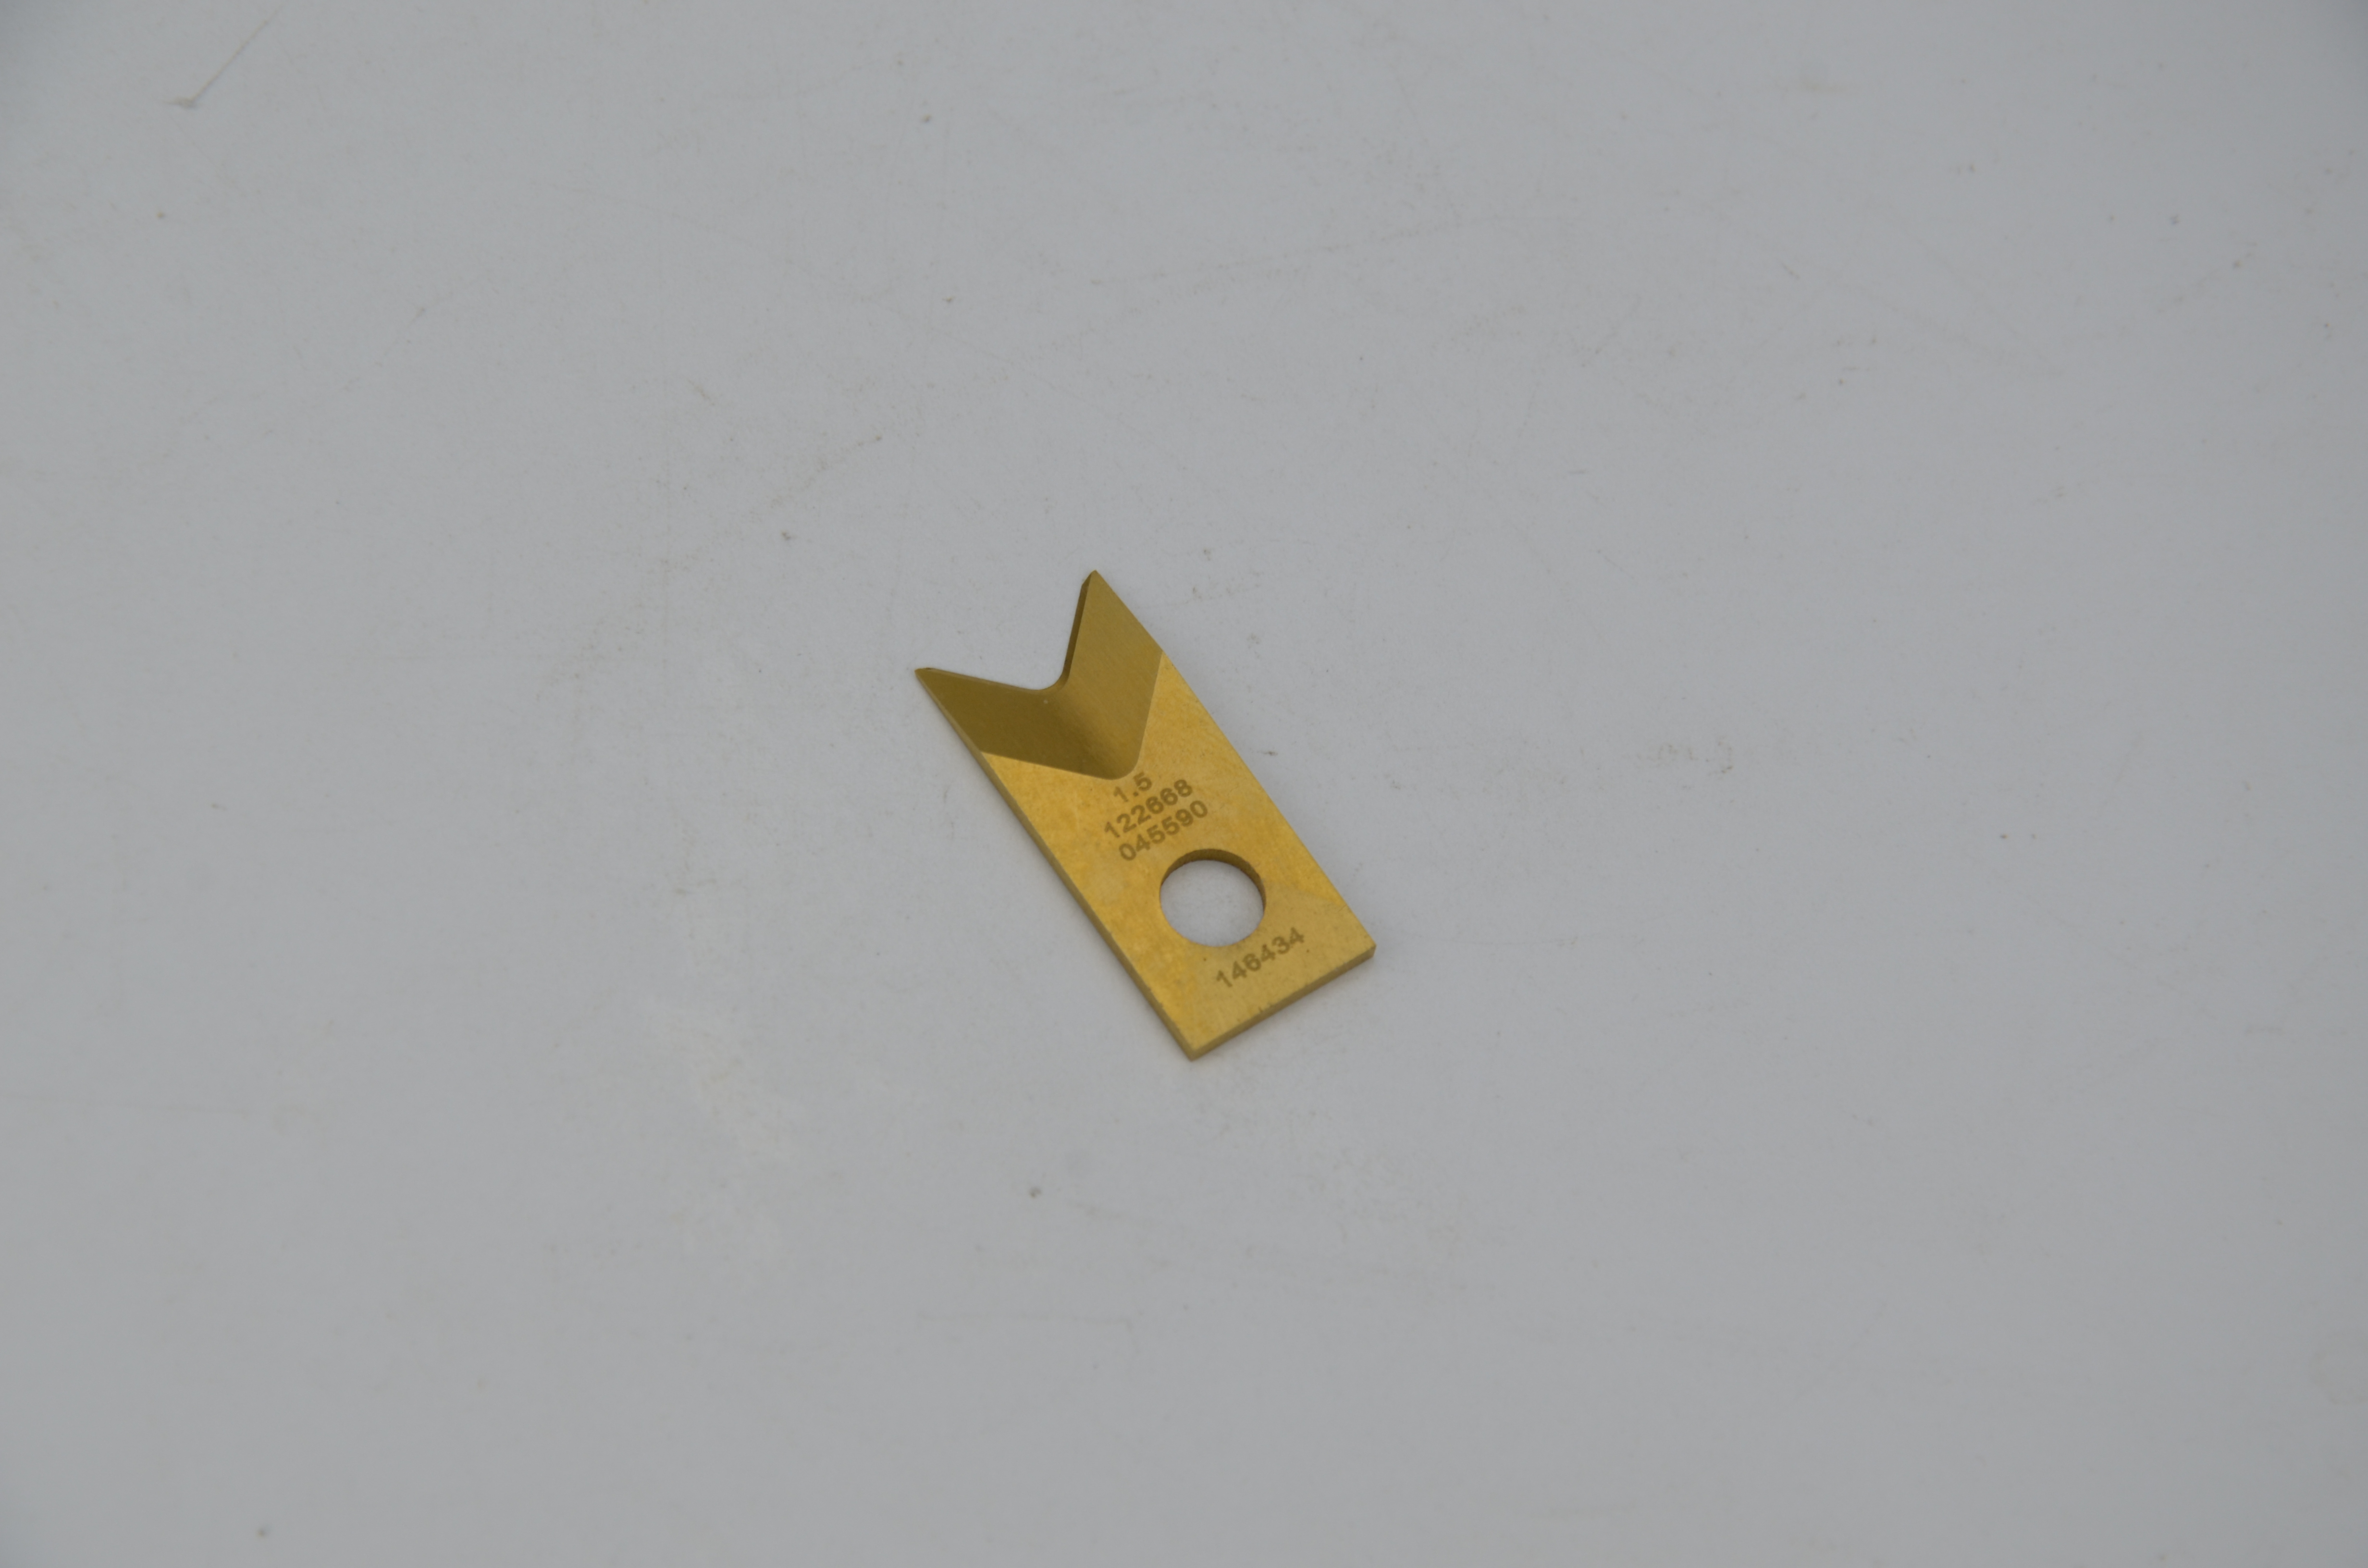 Mold Accessories Connector Mold Inserts Manufacturer –  CNC non-standard custom CNC lathe turning and milling parts custom precision mechanical hardware parts processing – SENDY